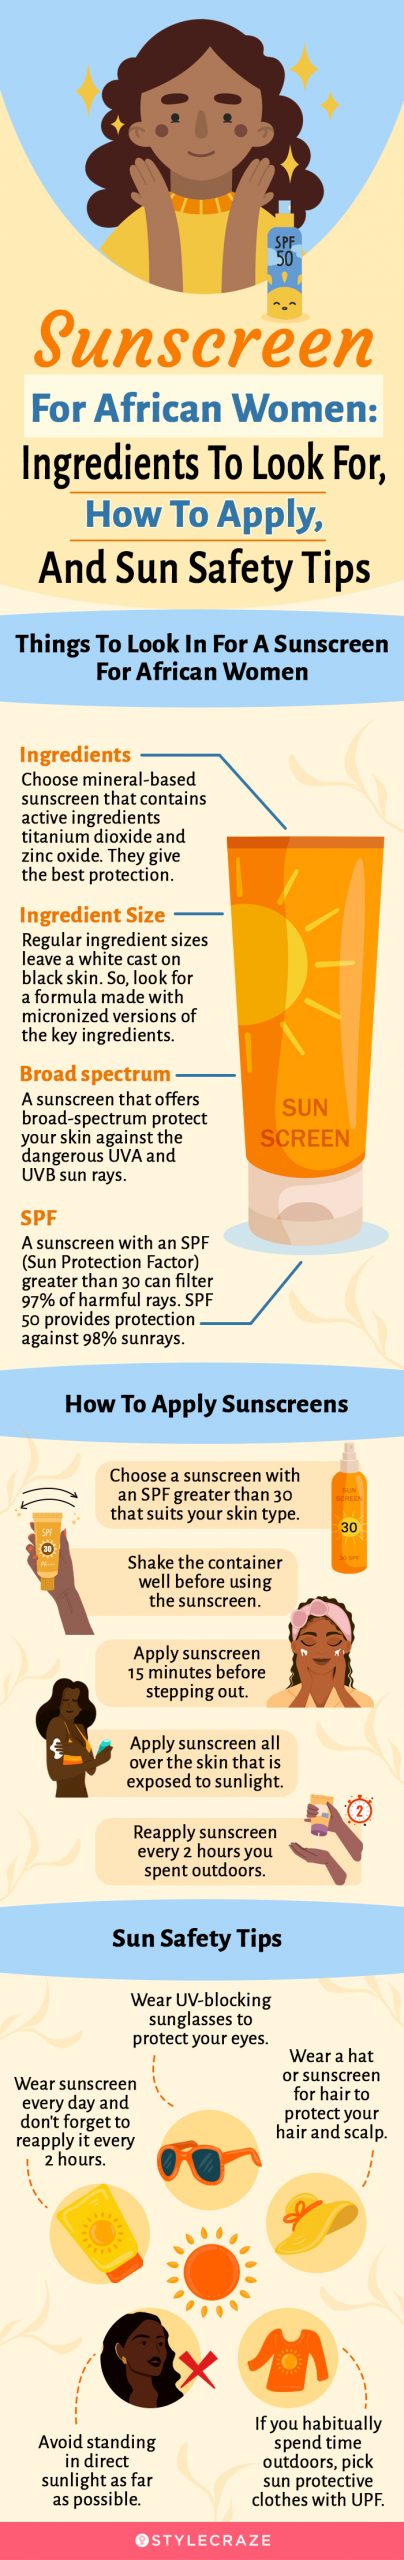 Sunscreen For African Women [infographic]